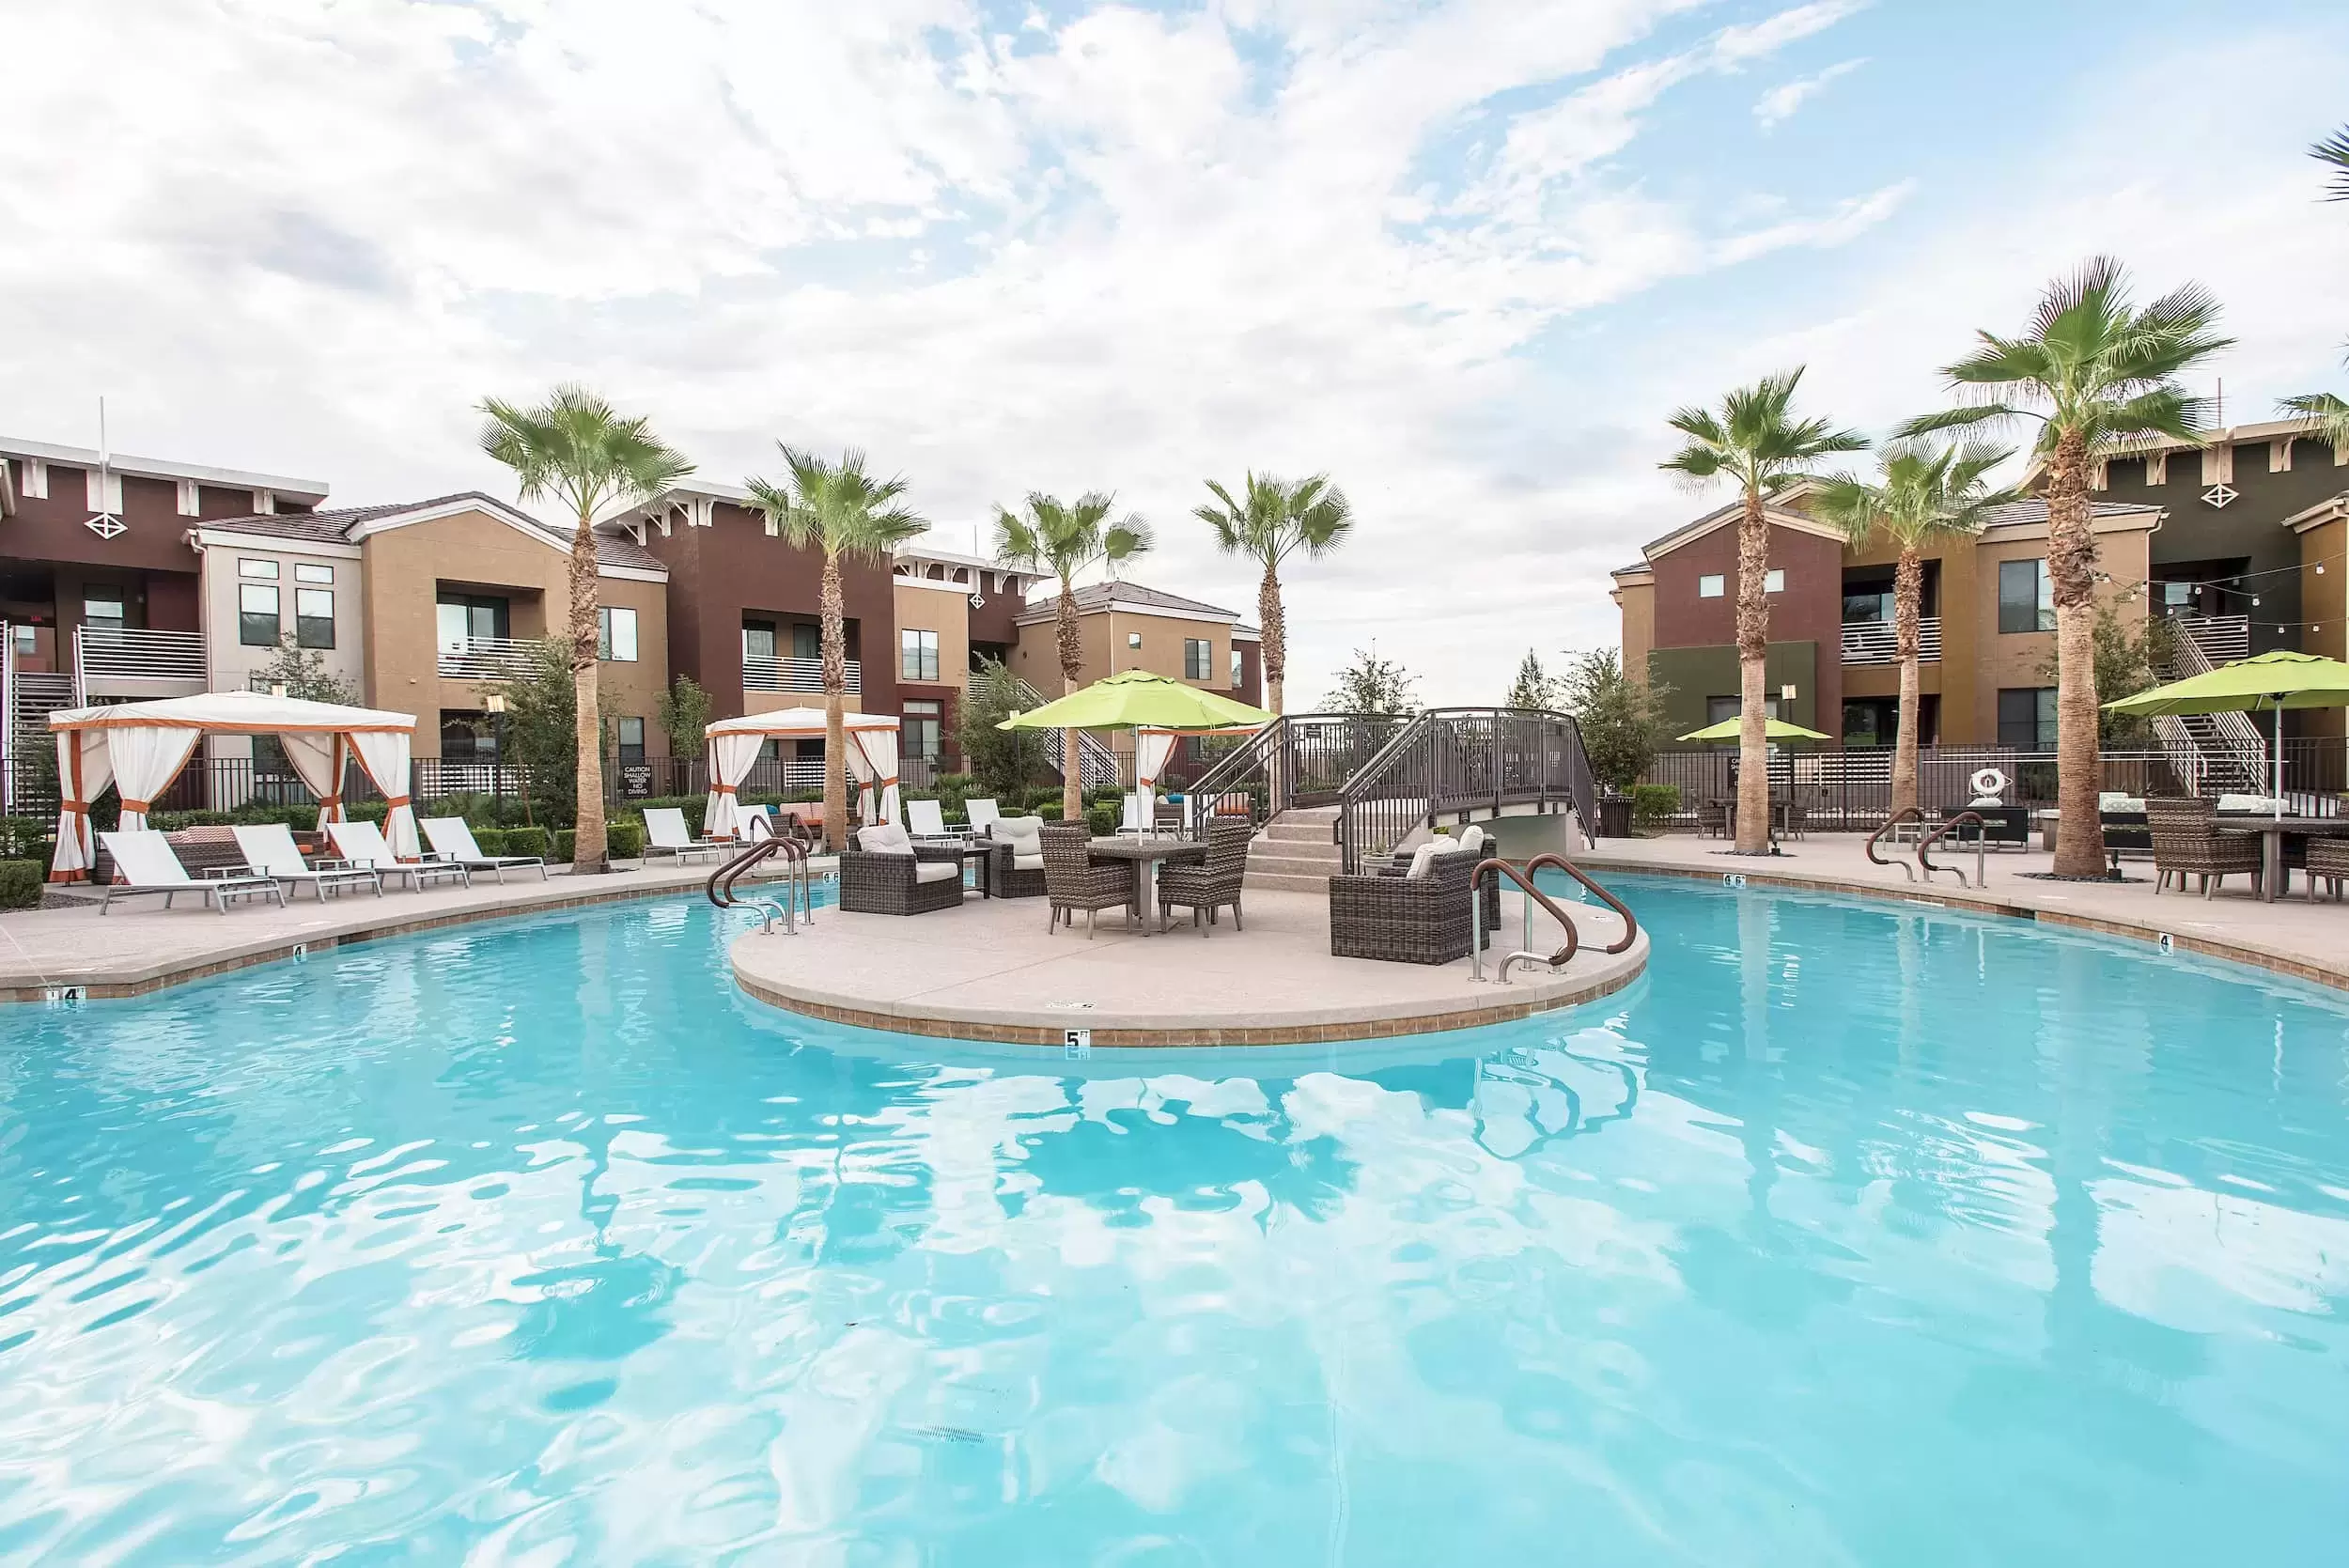 A view of the pool and patio, surrounded by palm trees and apartment buildings.